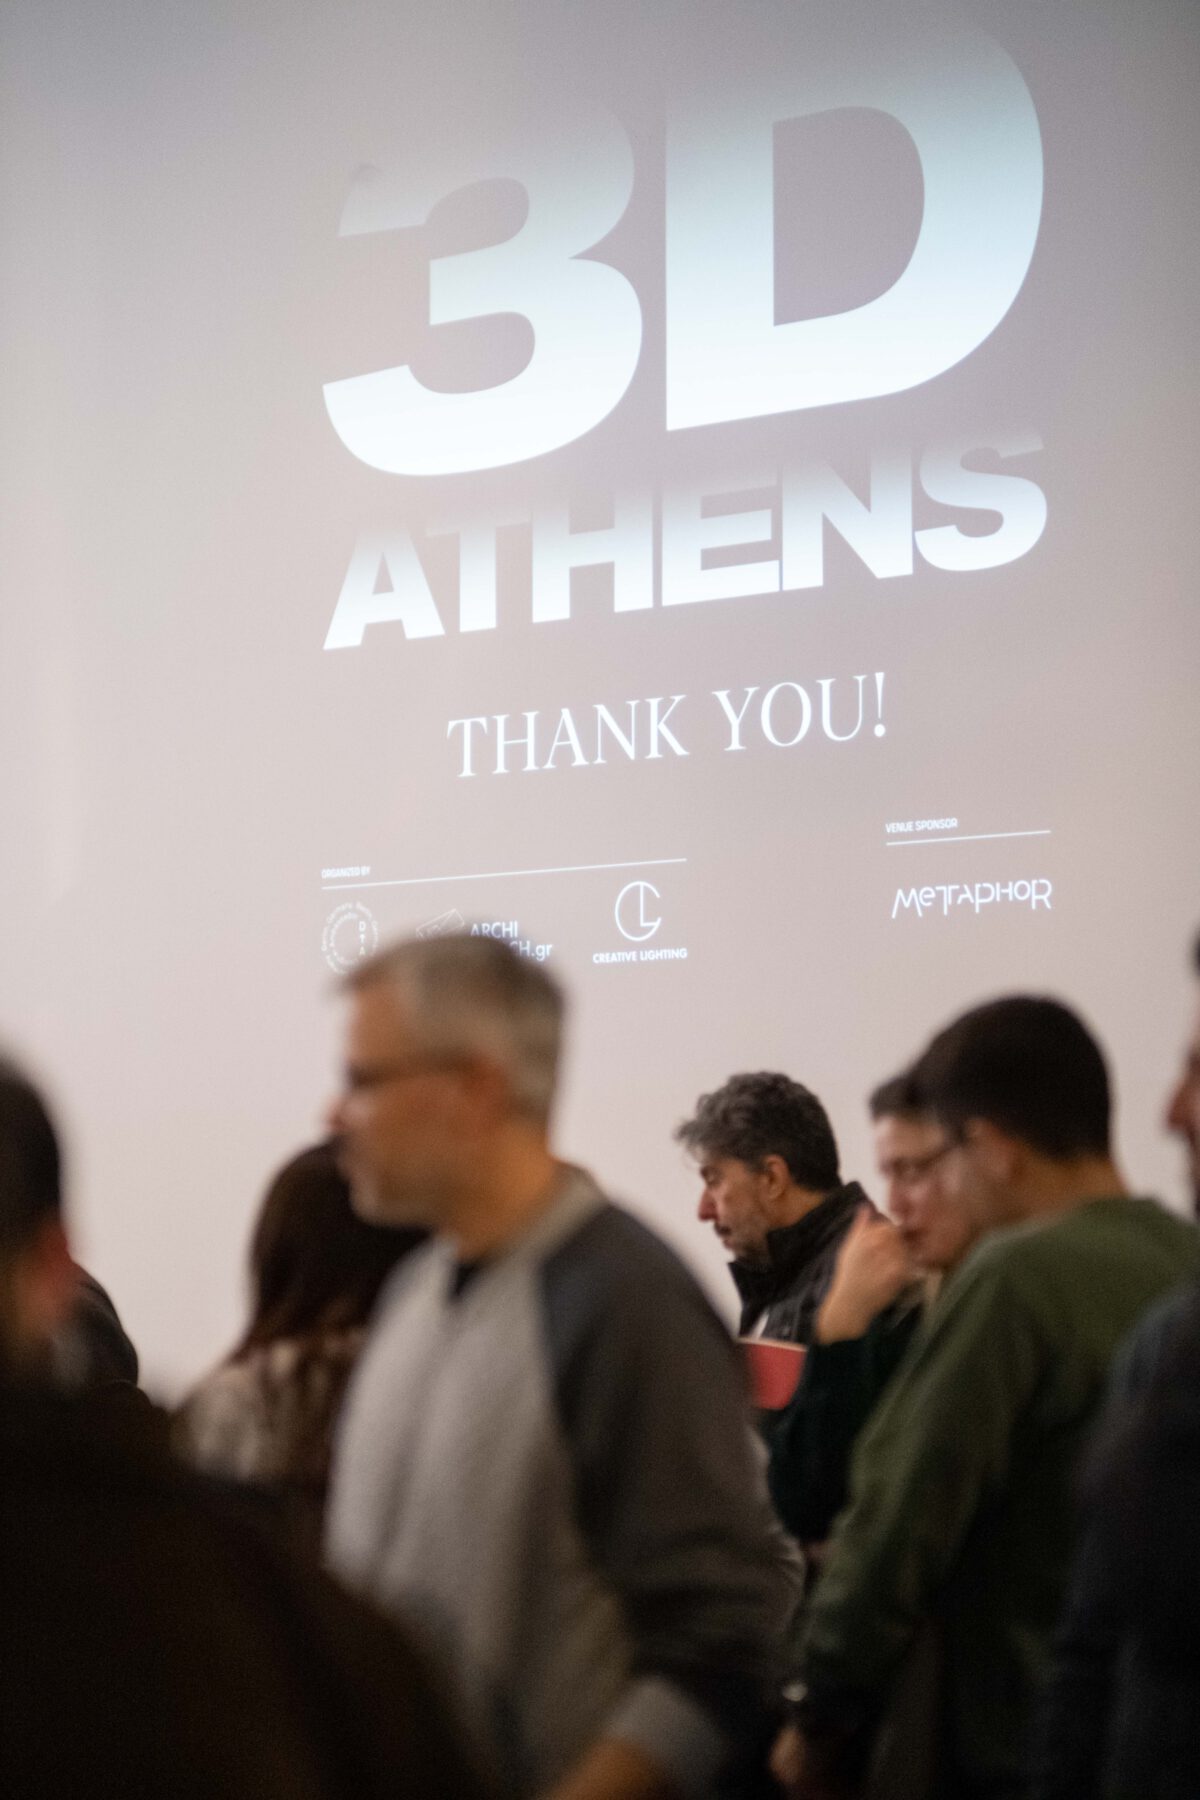 Archisearch WHAT HAPPENED AT THE SECOND 3D MEETUP ATHENS AT METAPHOR ATHENS BY CREATIVE LIGHTING & DESIGN AMBASSADOR